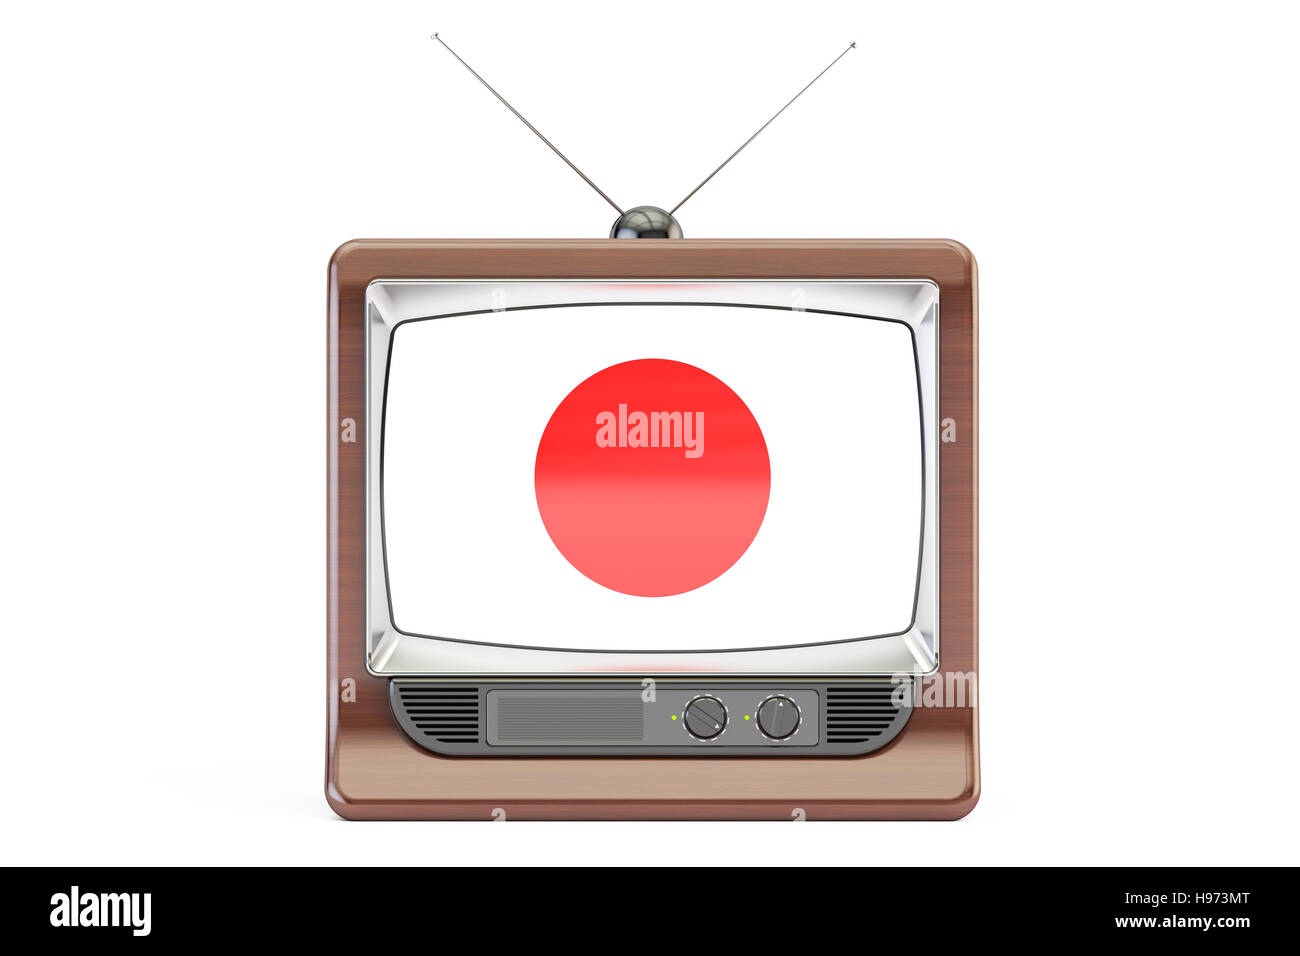 Old TV set with flag of Japan. Television concept, 3D rendering isolated on white background Stock Photo